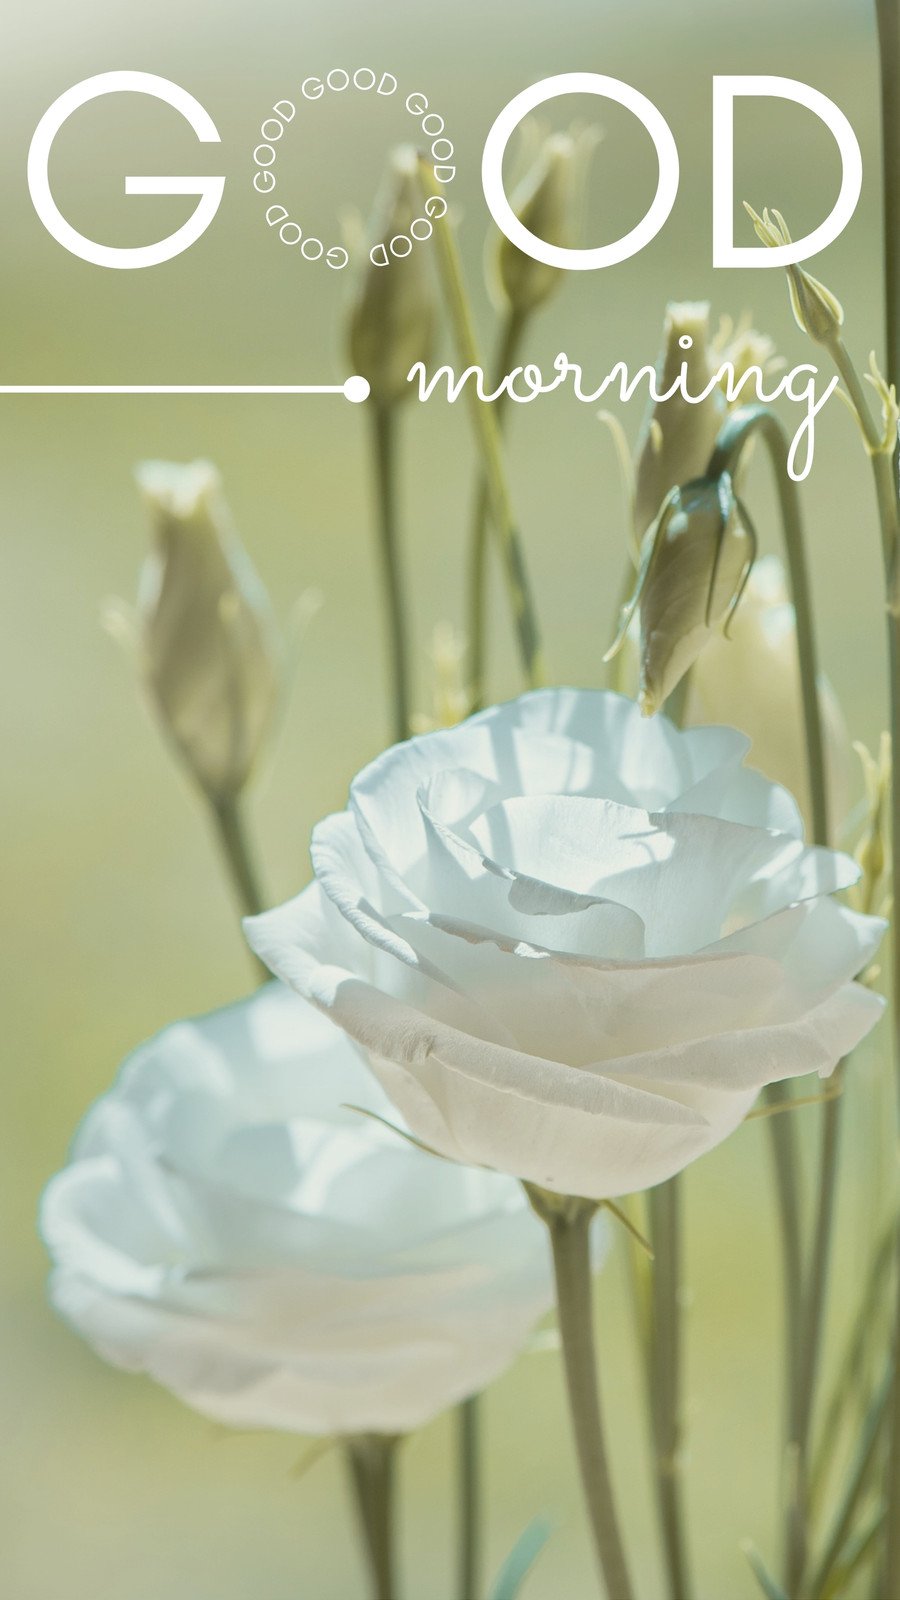 Free And Customizable Good Morning Templates